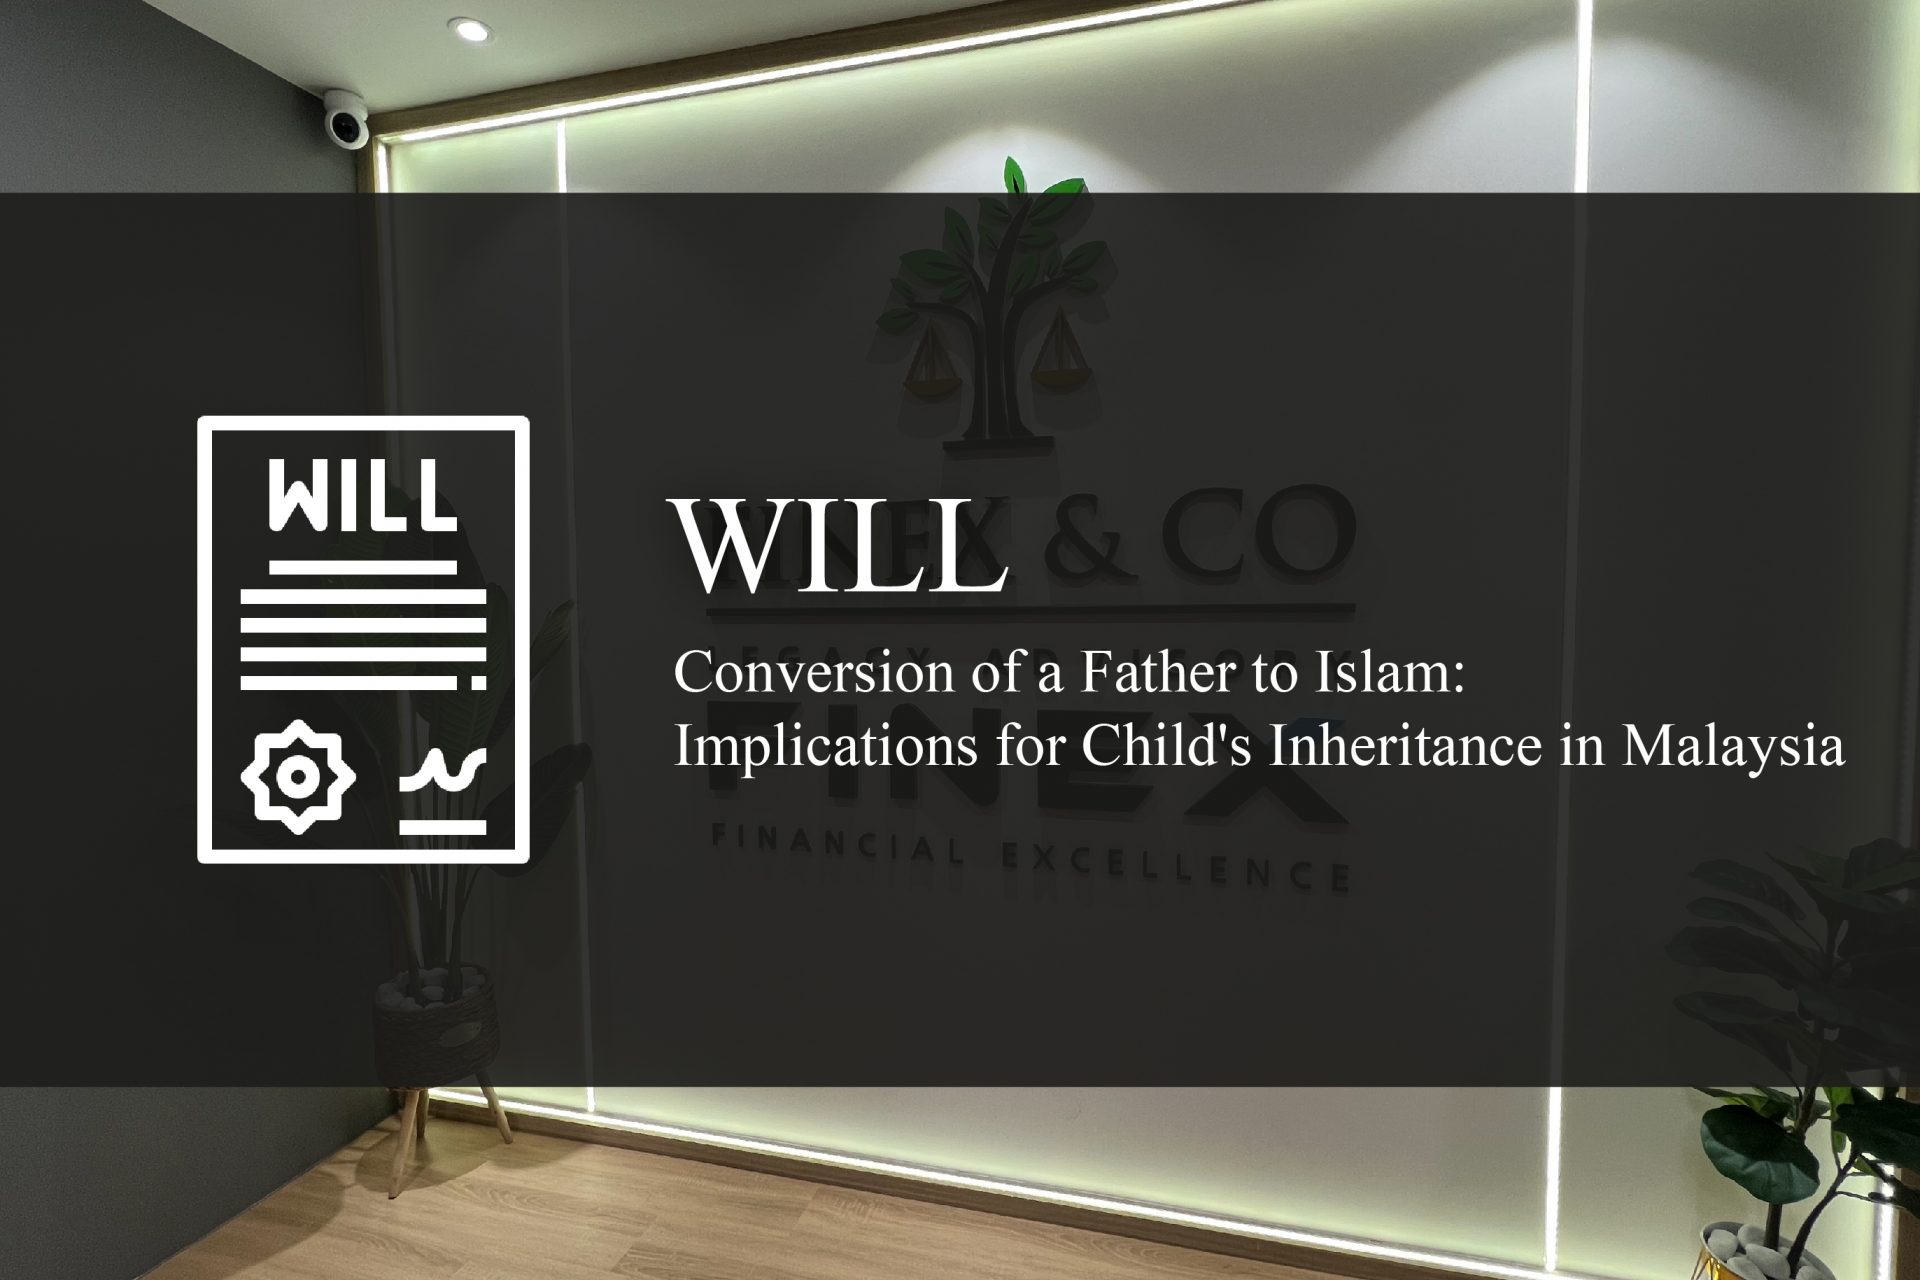 Conversion of a Father to Islam: Implications for Child’s Inheritance in Malaysia